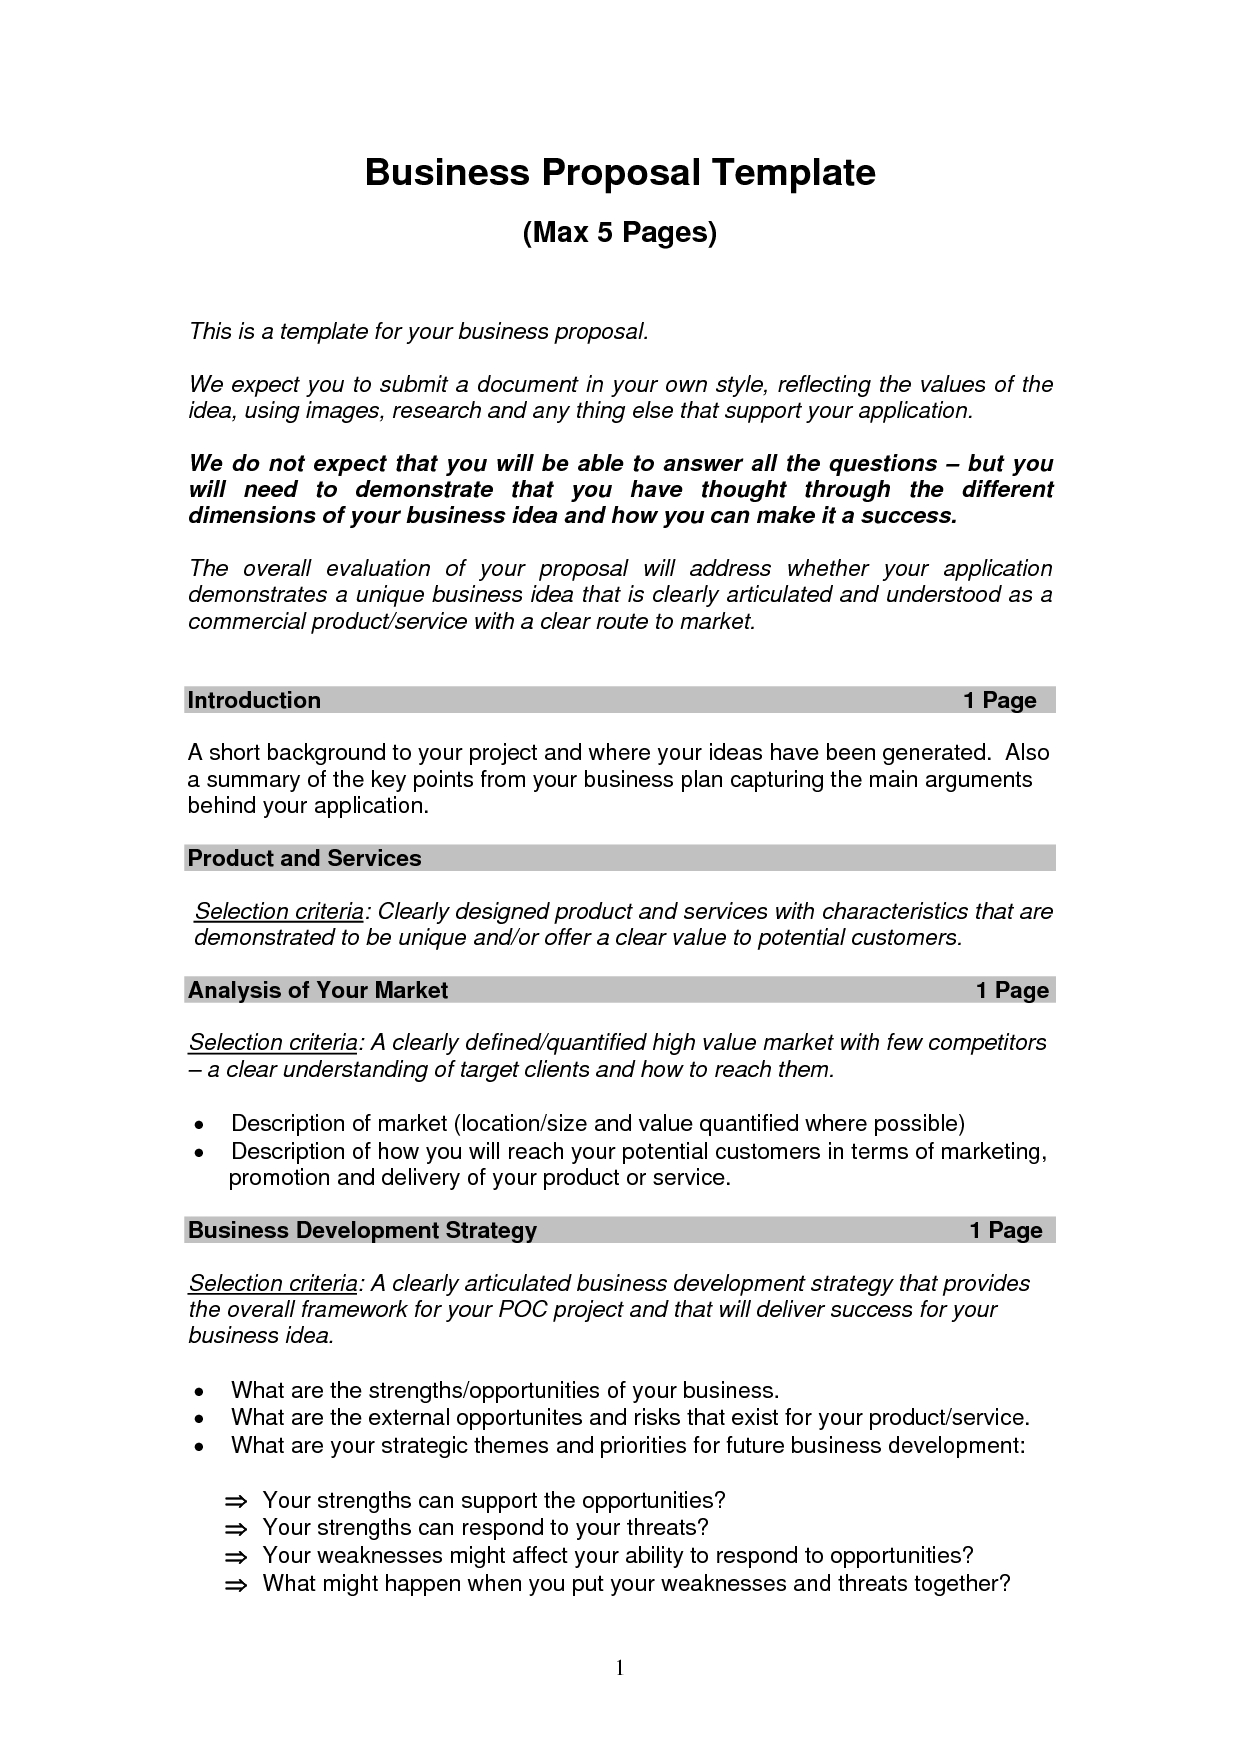 Business Proposal Templates Examples  Business Proposal Sample within Small Business Proposal Template